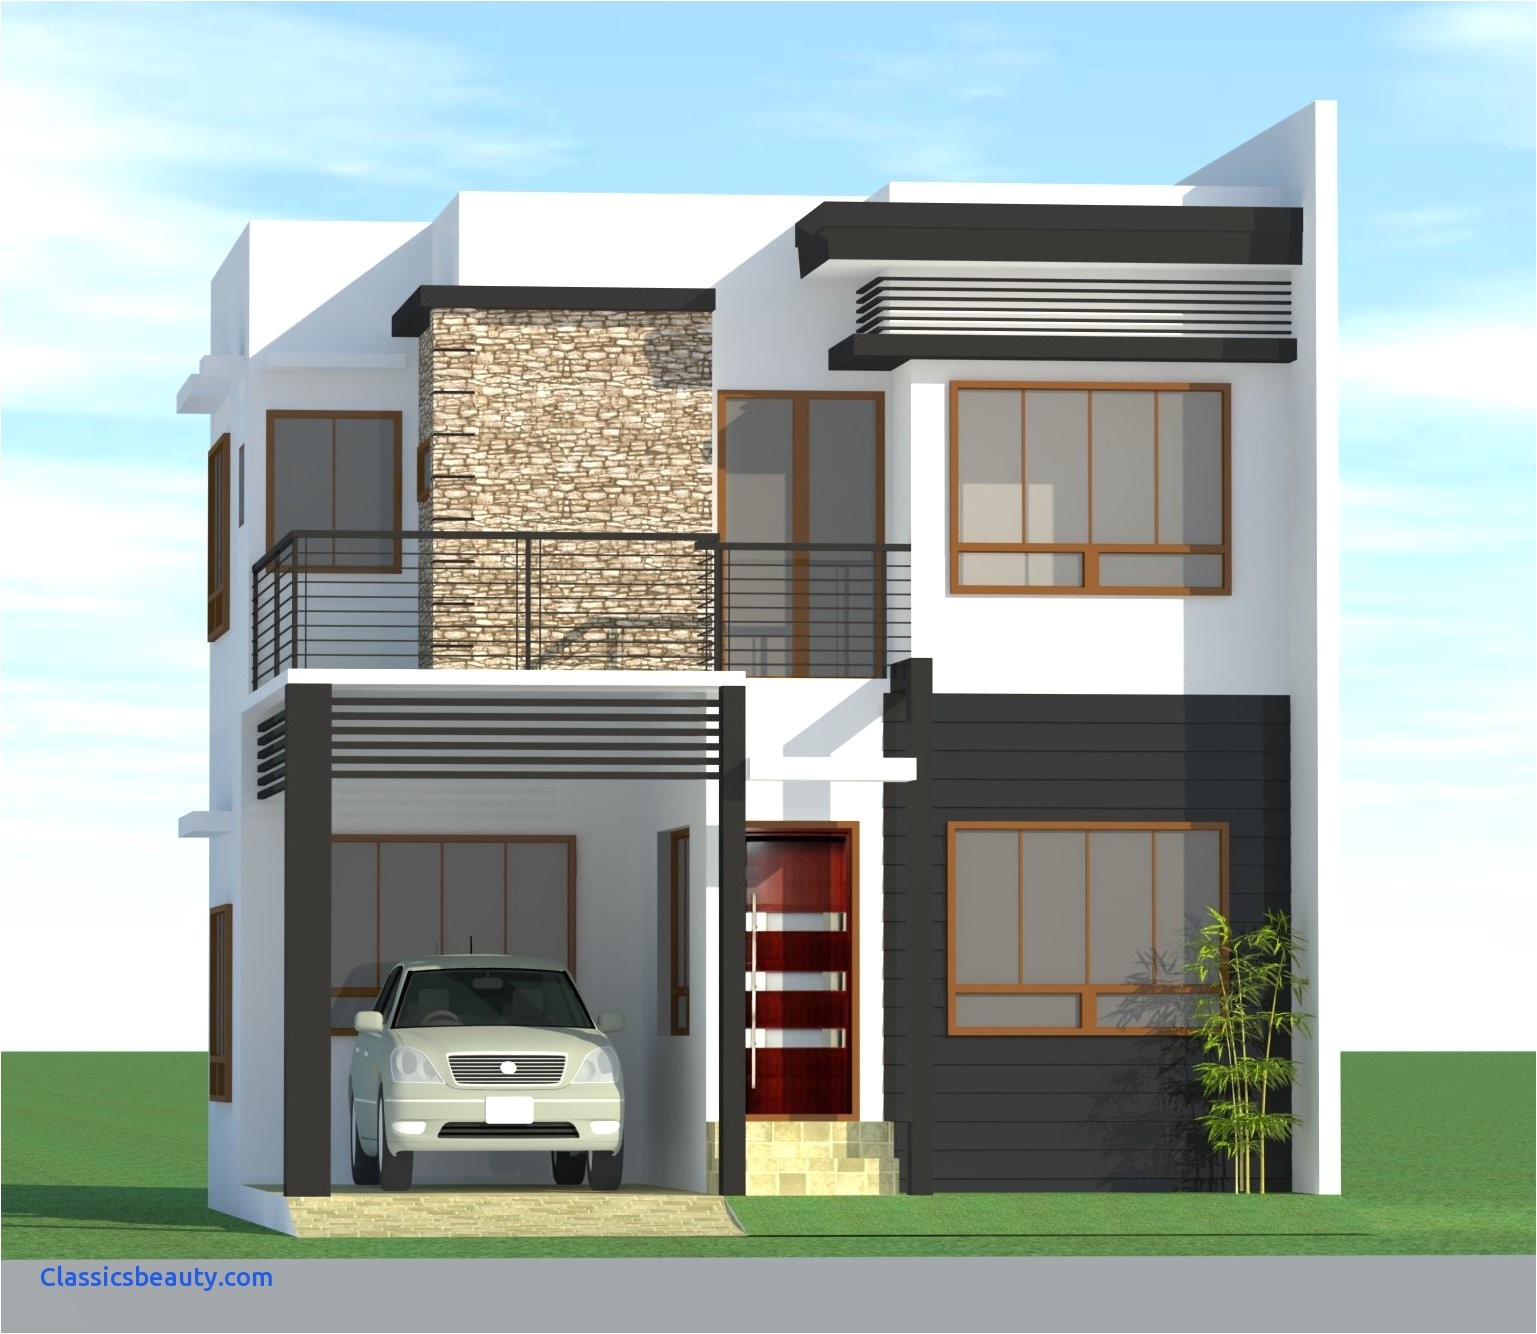 new modern house plans new download modern house plans and designs in philippines